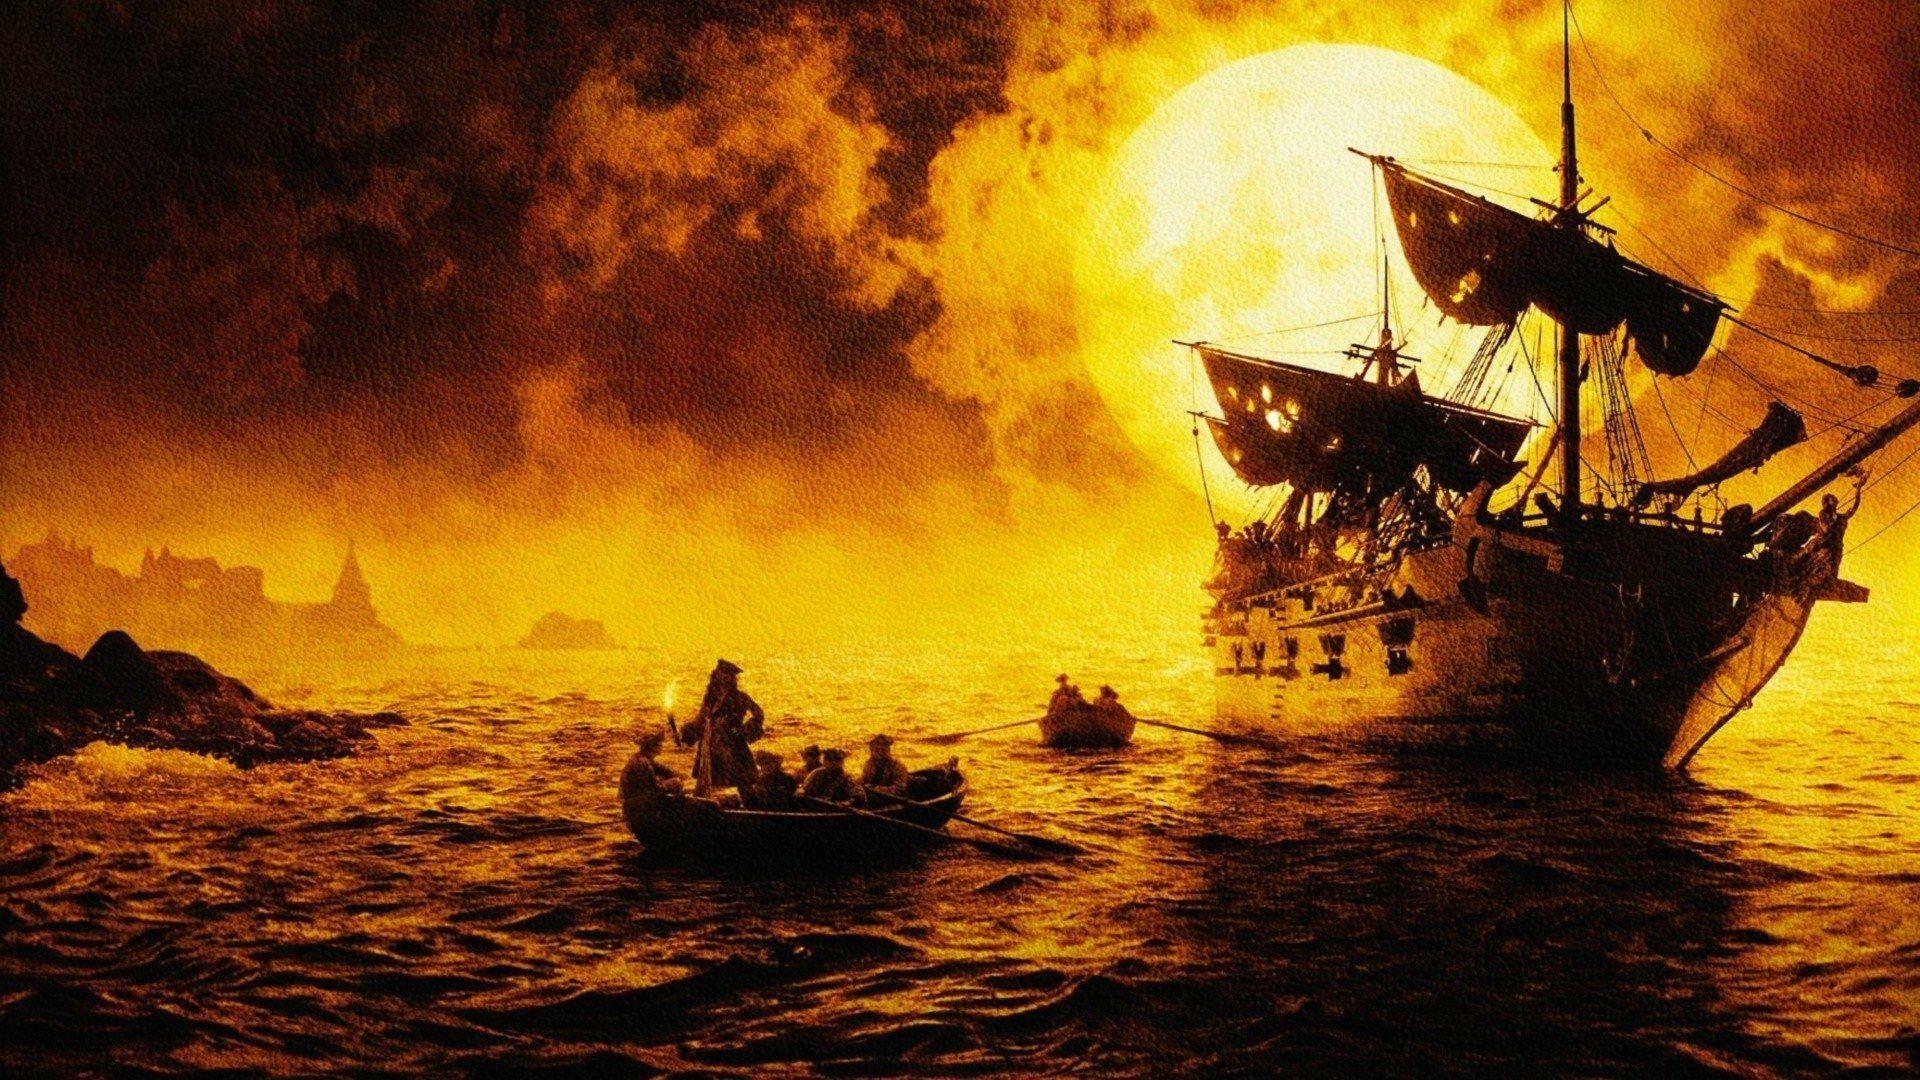 Pirates Of The Caribbean iPhone Wallpapers - Wallpaper Cave